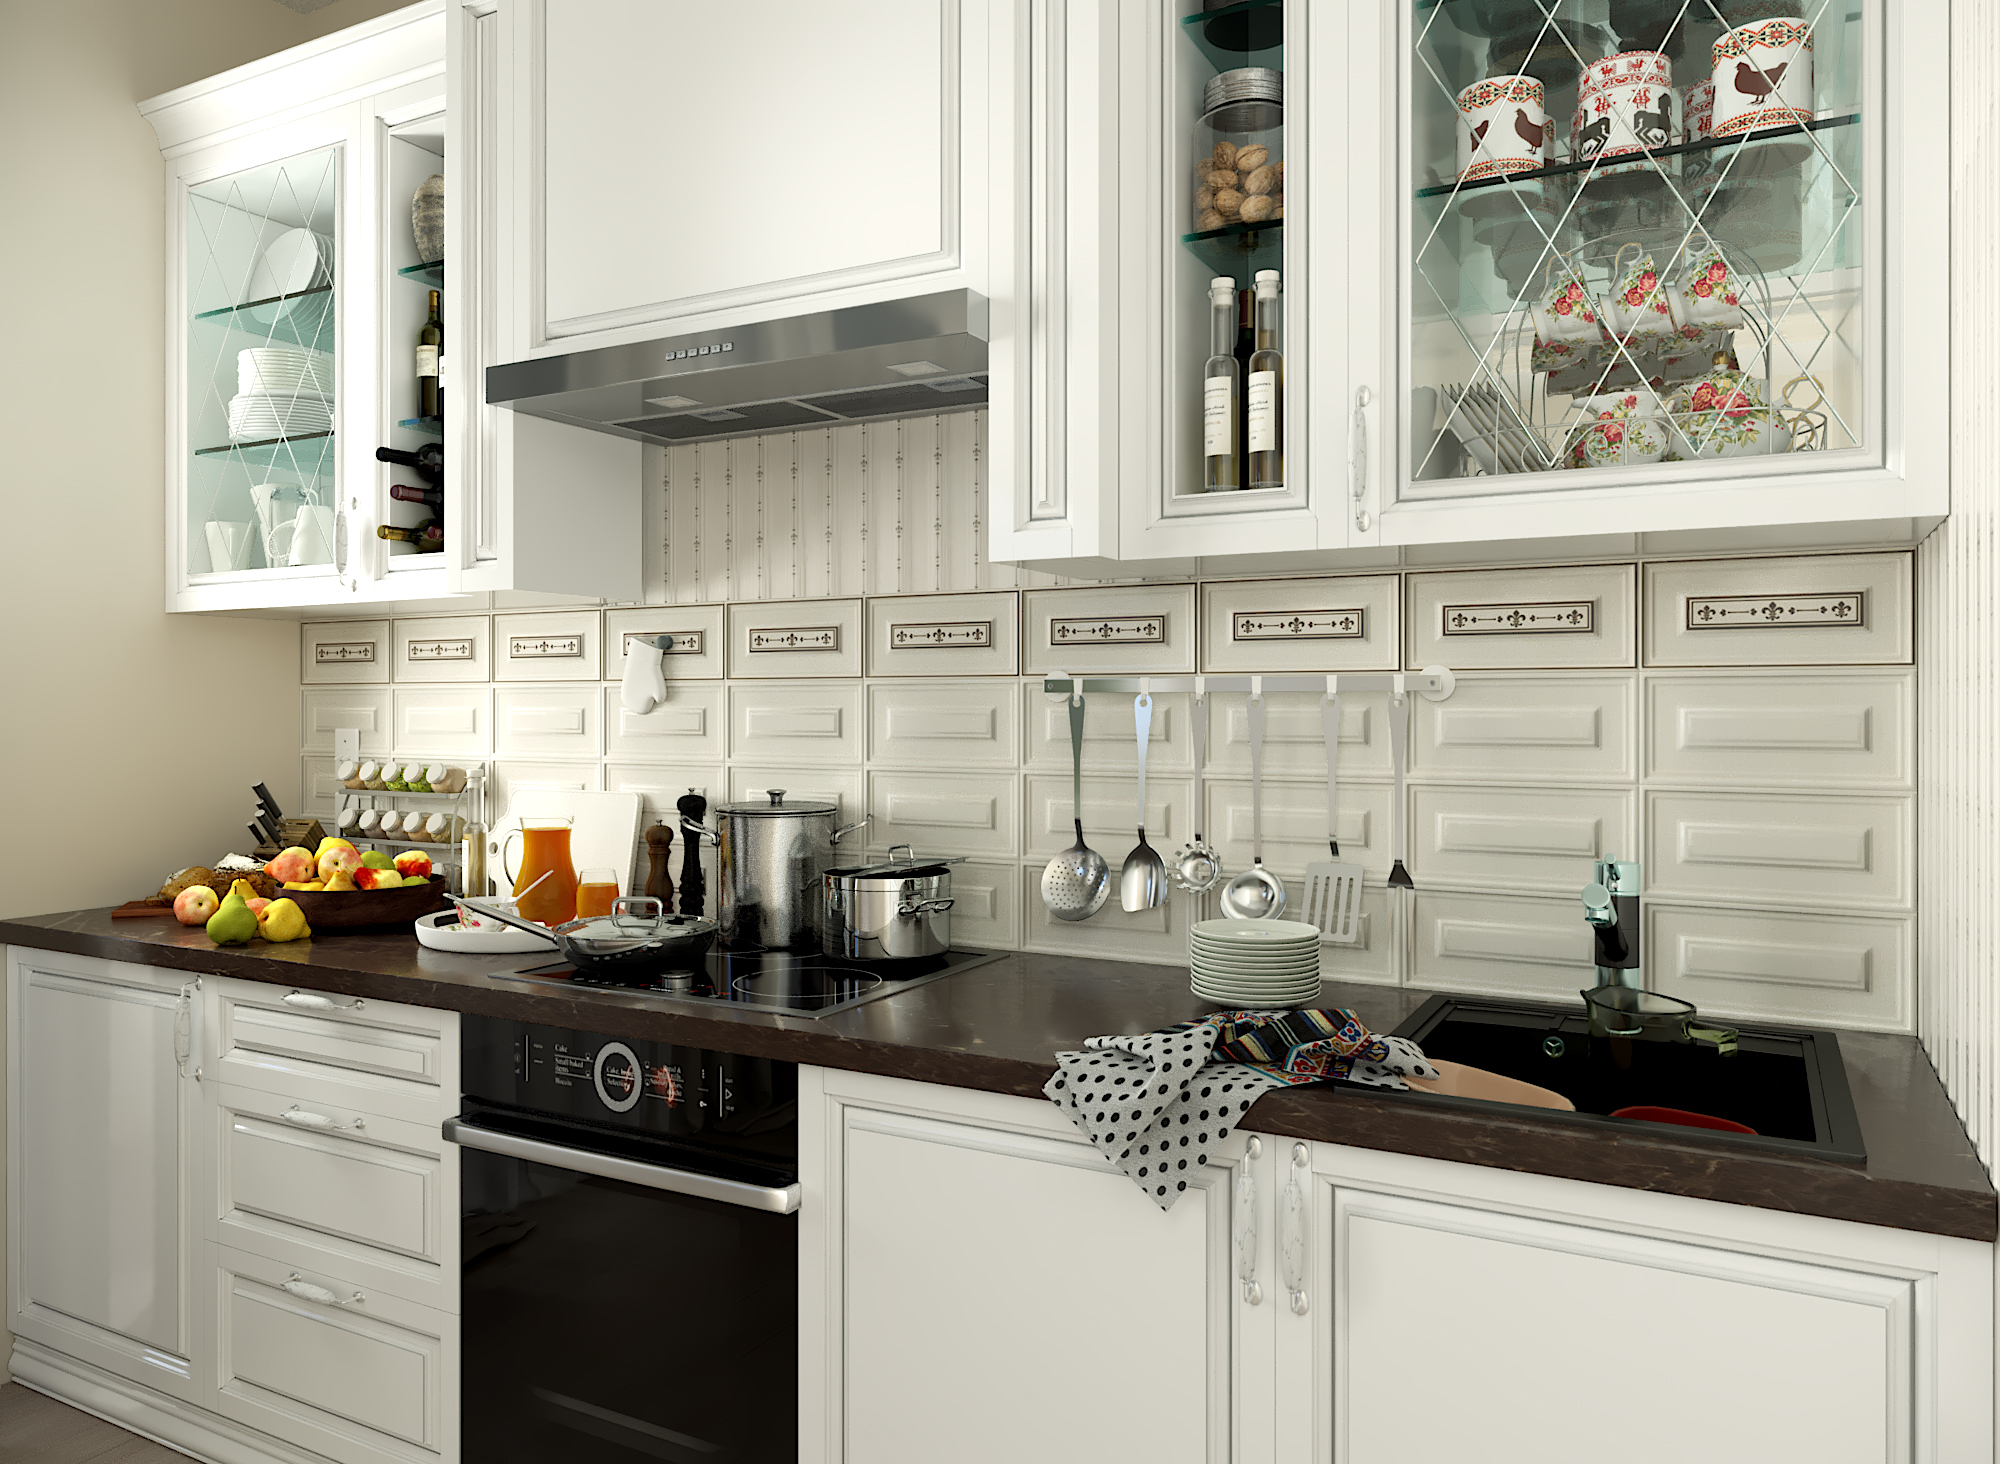 3D visualization of the kitchen in 3d max corona render image